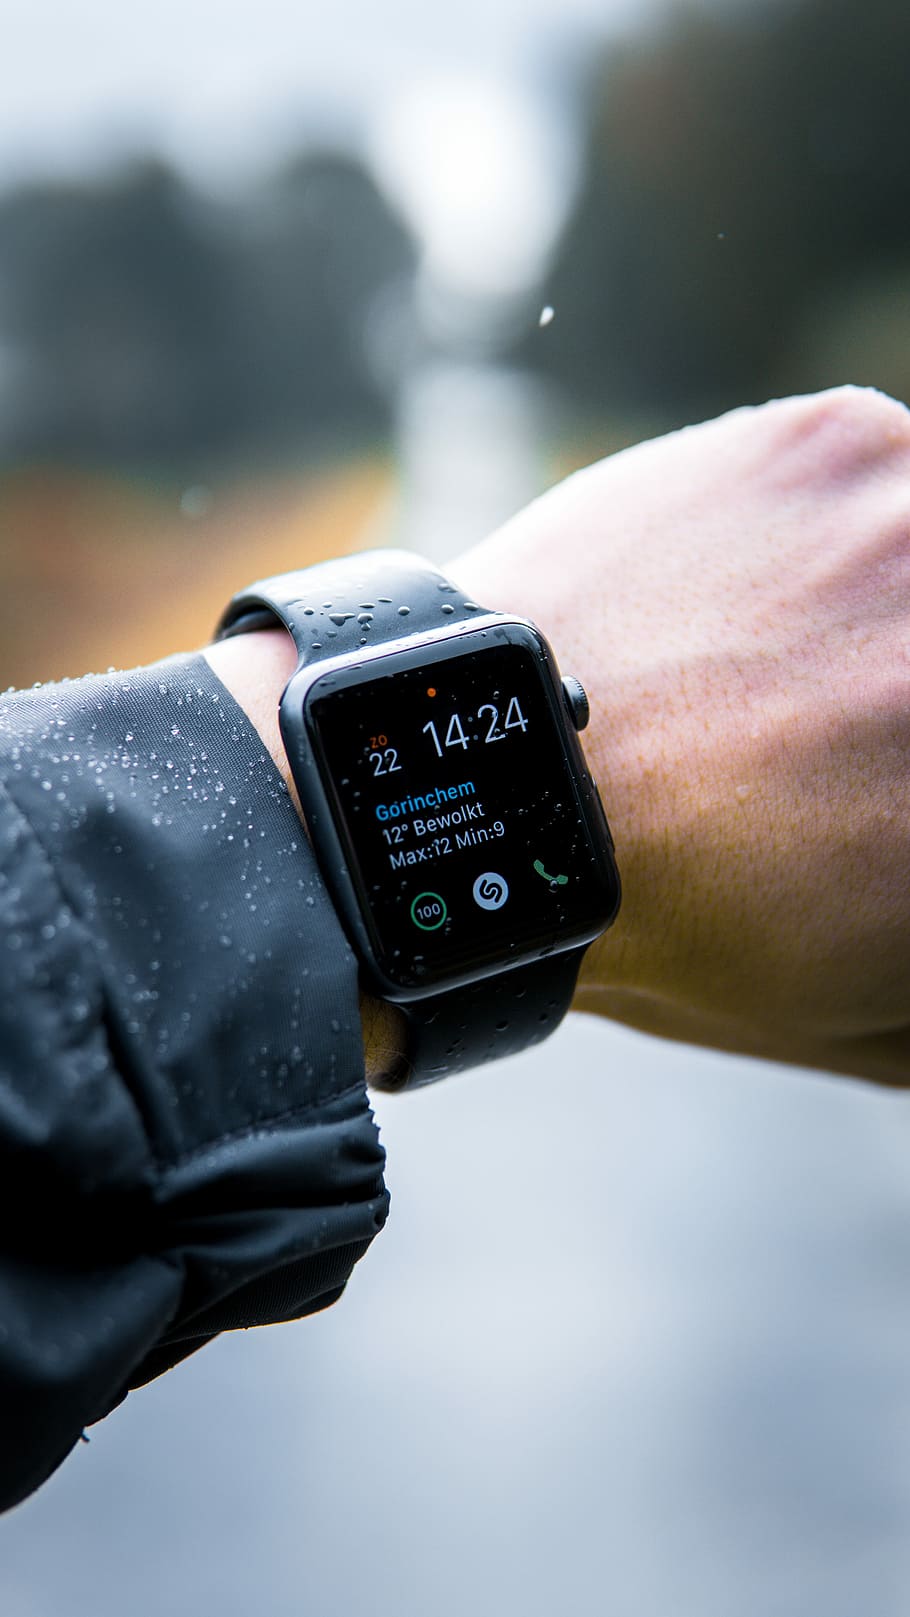 person wearing Apple Watch at 14:24, black Apple Watch with sports band, HD wallpaper